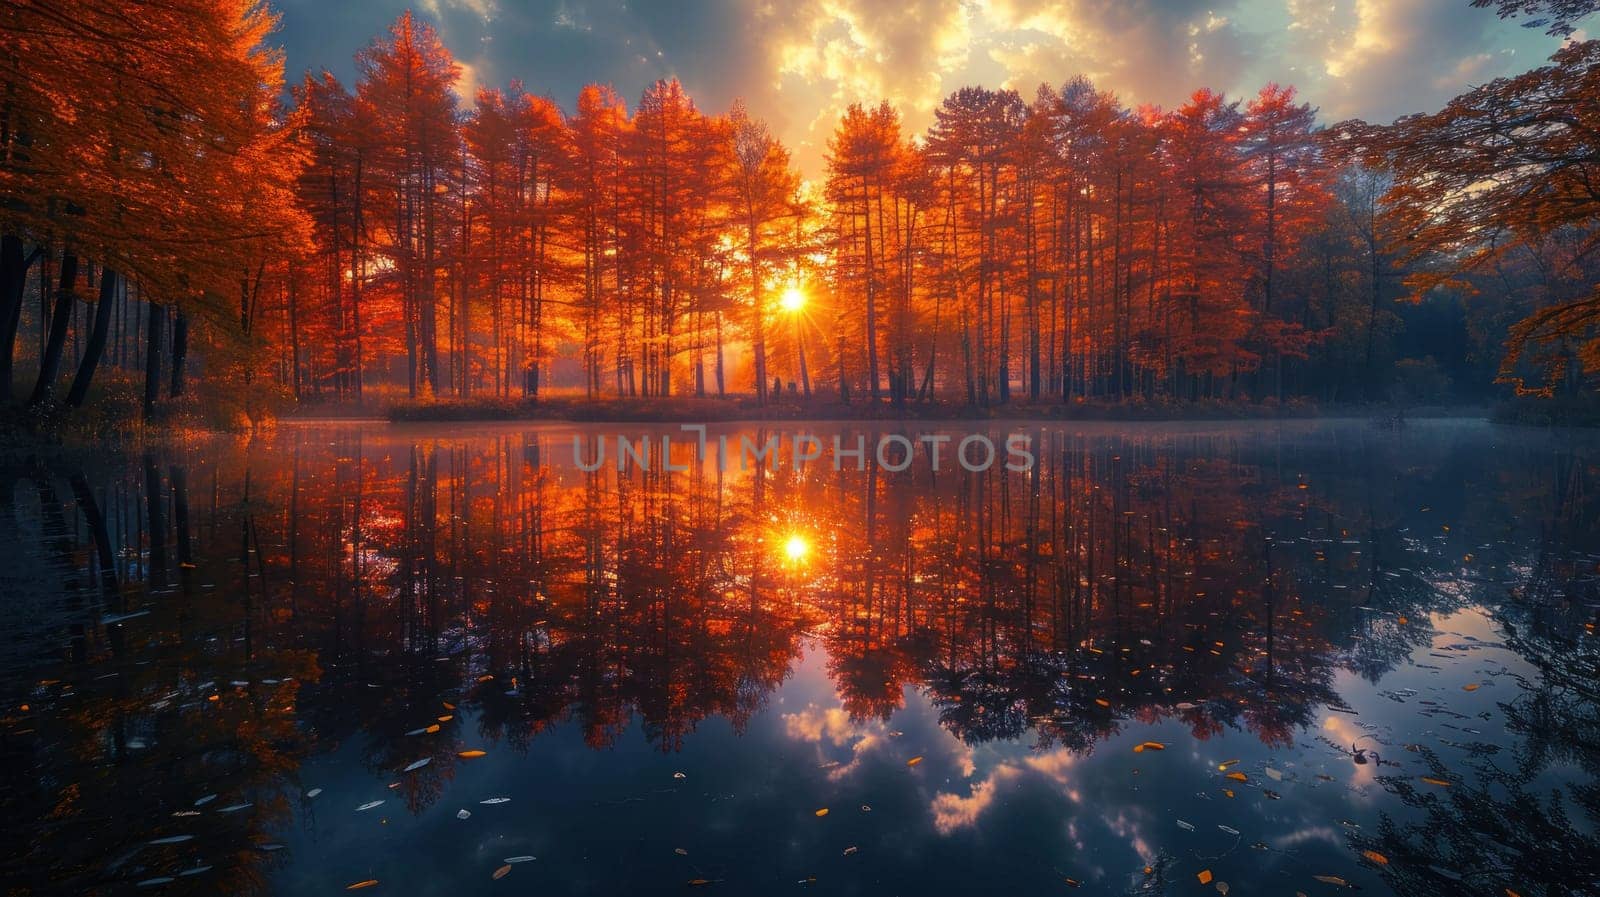 A beautiful autumn day with a sun shining on a lake. The trees are orange and the water is calm